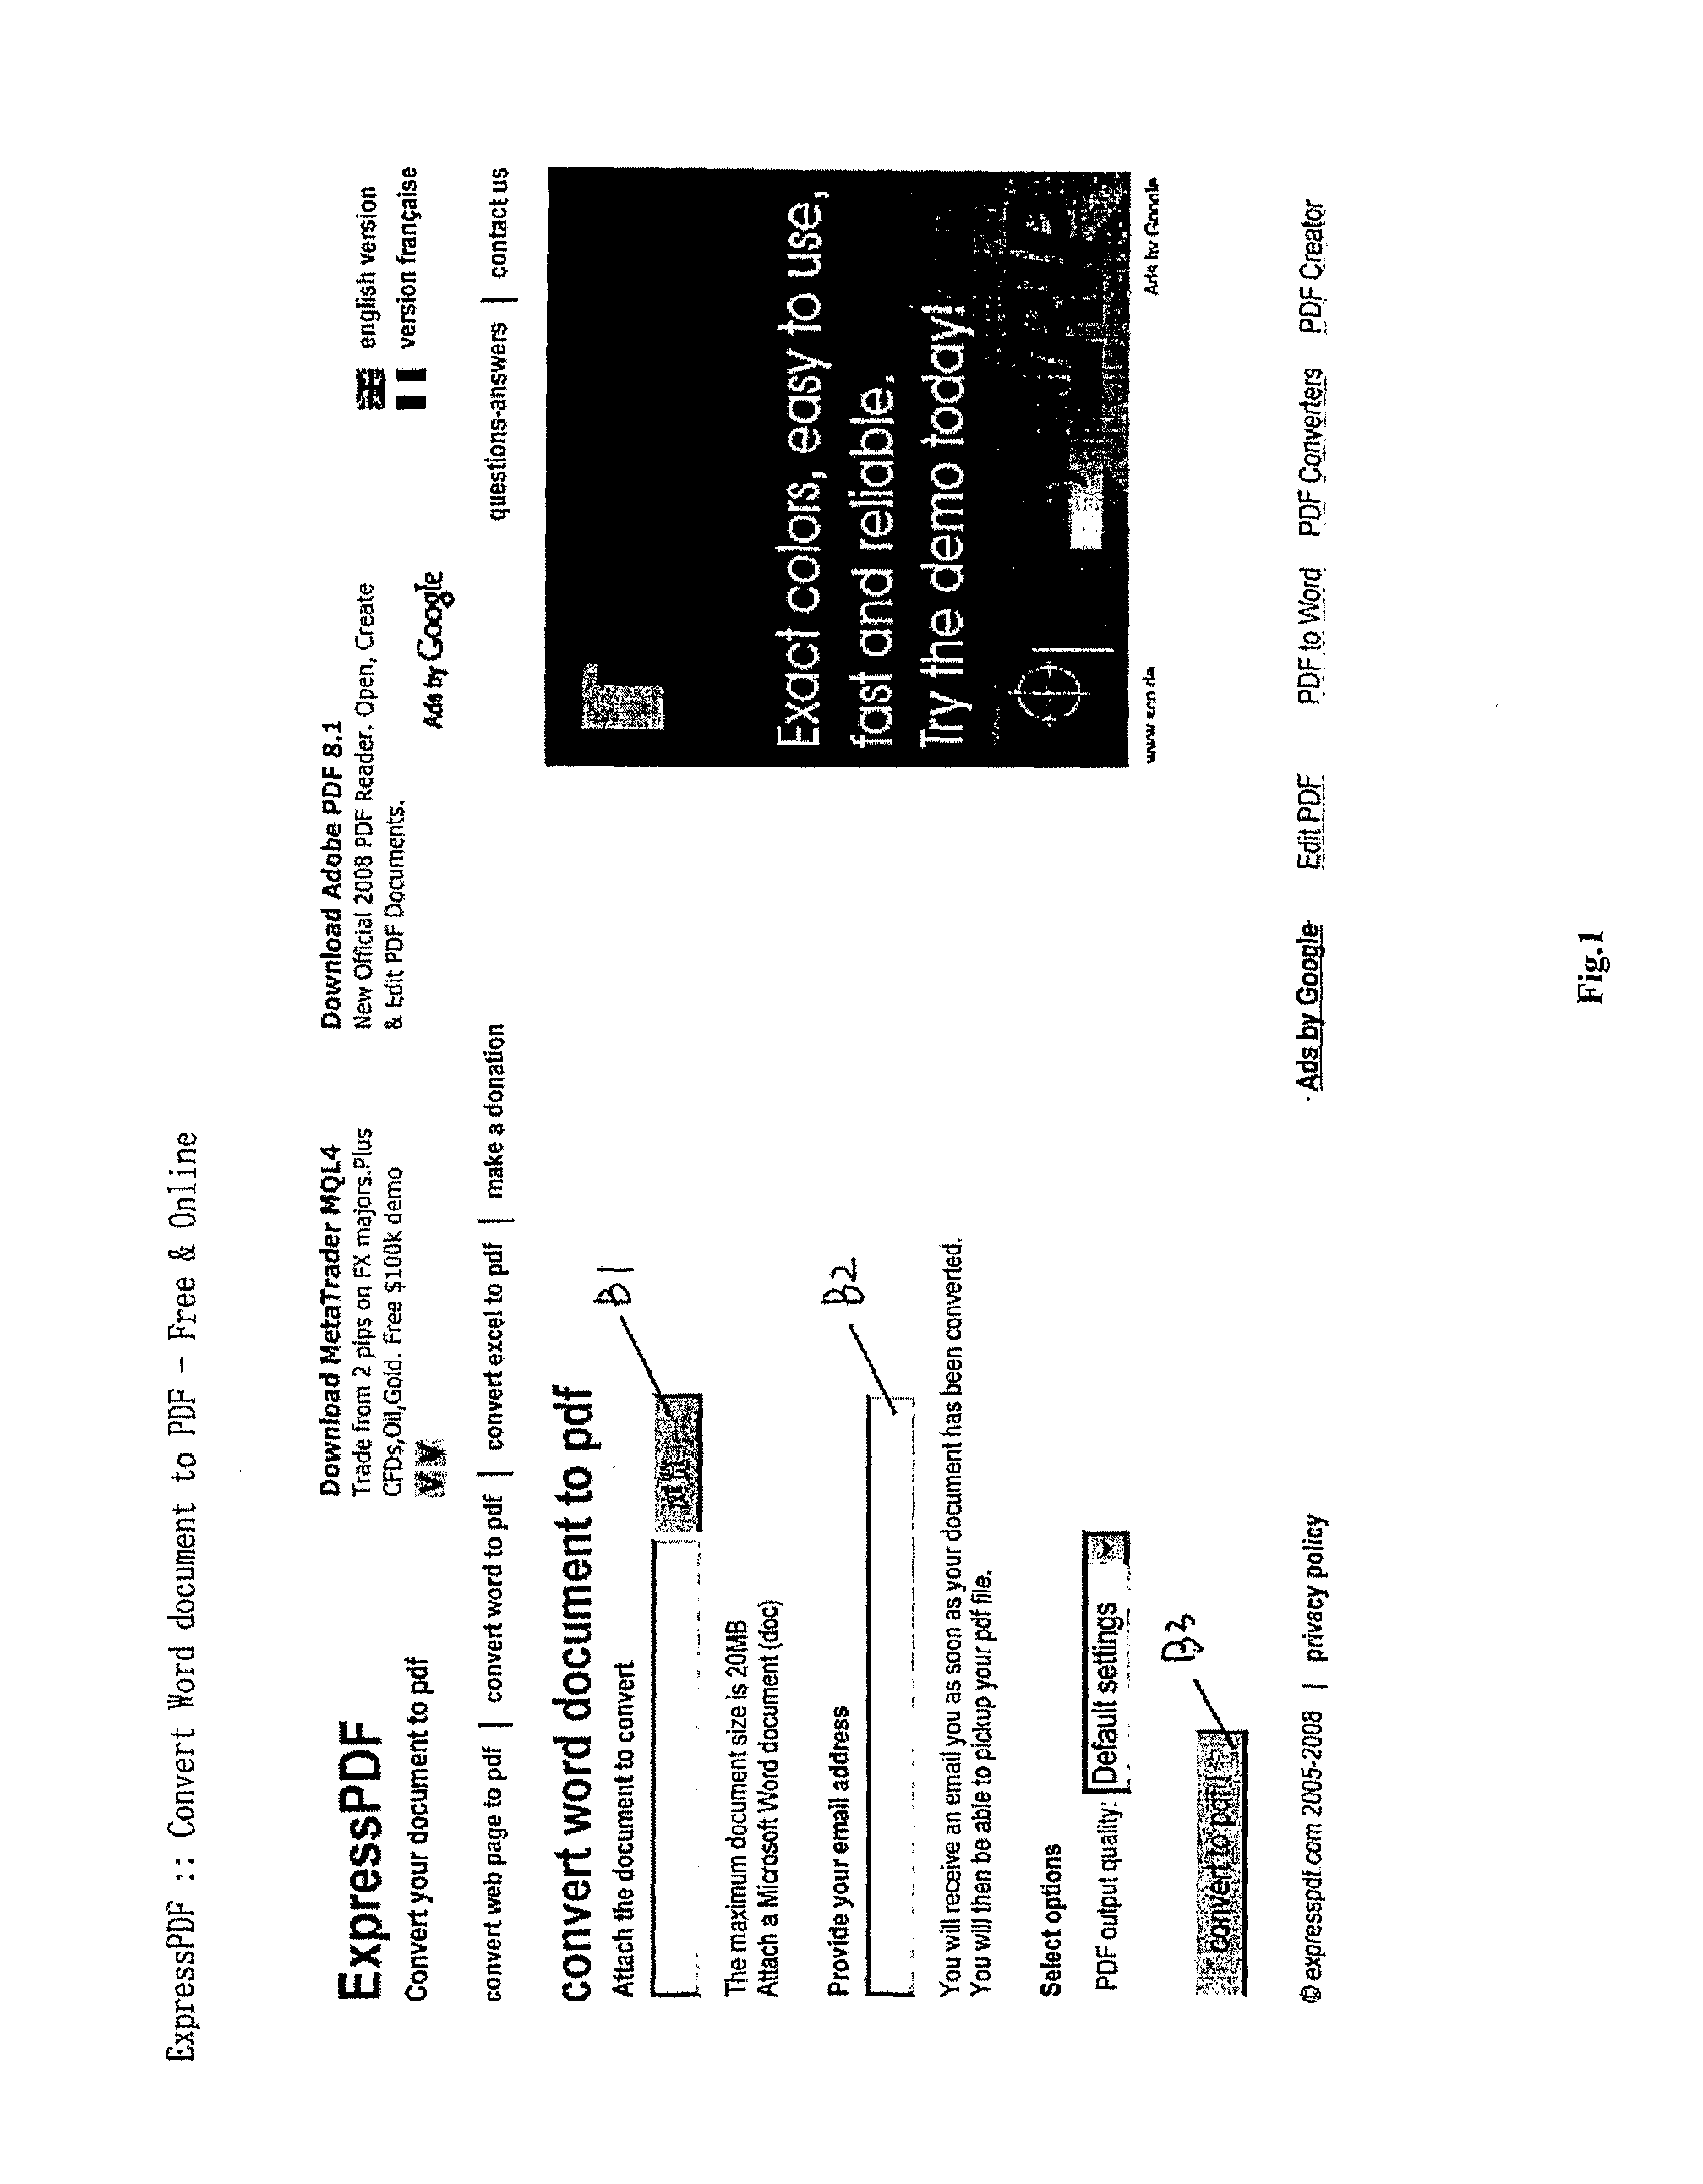 The method and apparatus for the resource sharing between user devices in computer network